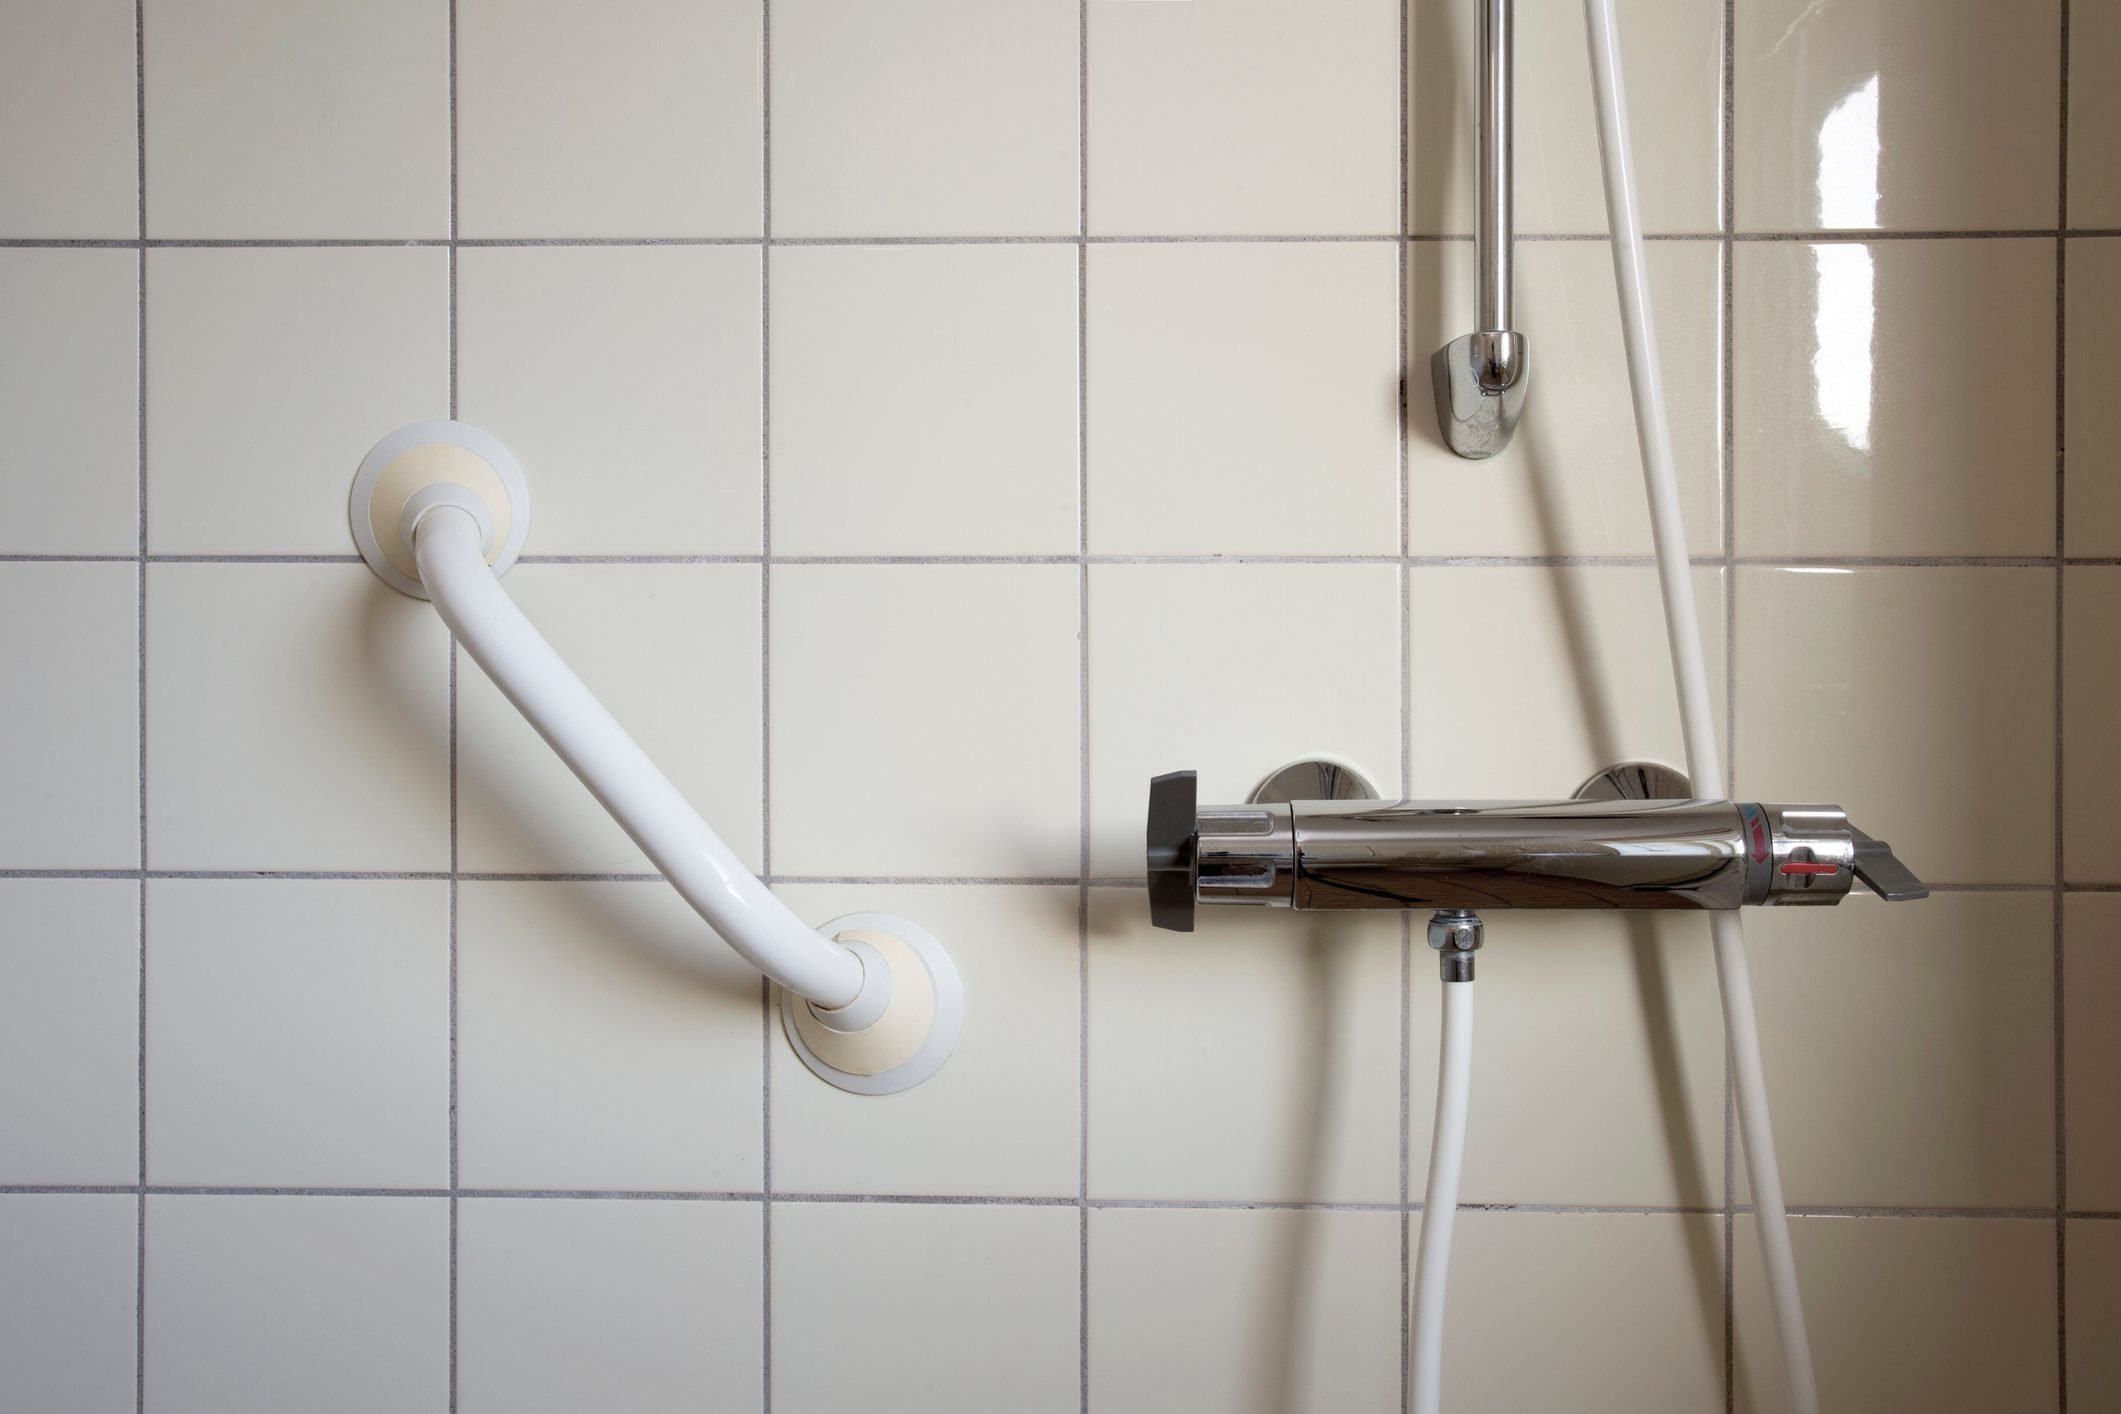 Shower and handrail,grab bar for elderly people at the bathroom in hospital or retirement home , safty and medical concept